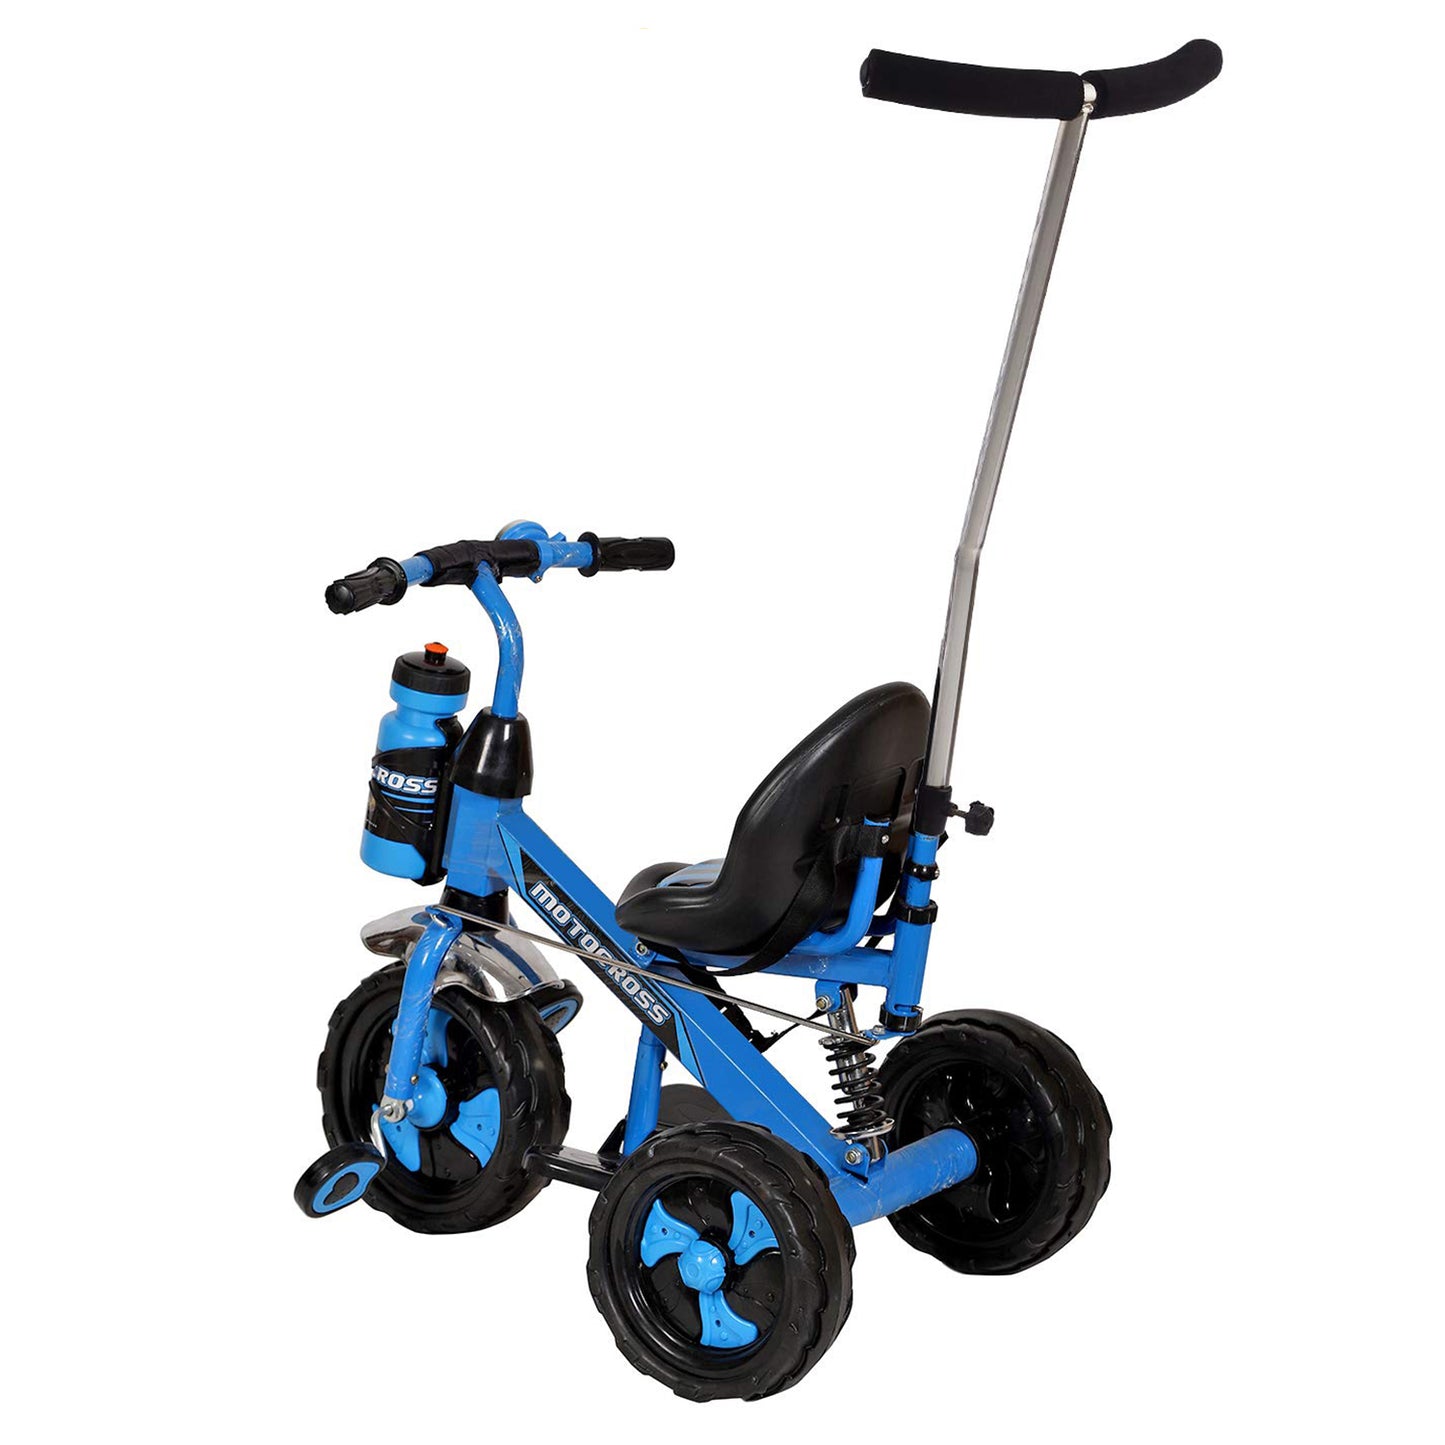 Dash Motocross Deluxe Tricycle with Back Rest & Parental Push Handle for Kids (Choose Any Color)